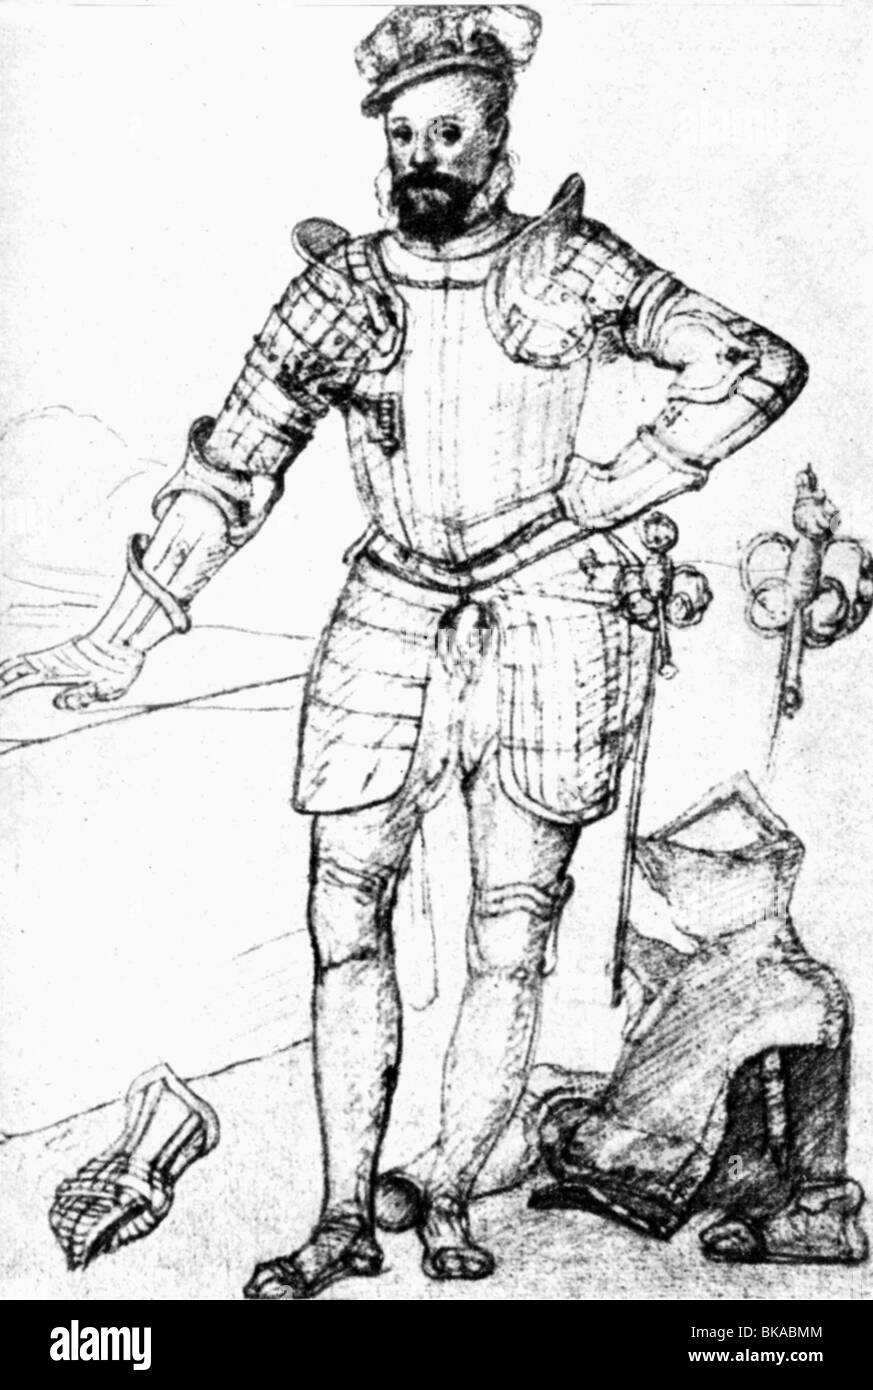 Dudley, Robert, 1st Earl of Leicester, 24.6.1532 - 4.9.1588, full length, drawing by Federico Zuccaro, 16th century, , Stock Photo